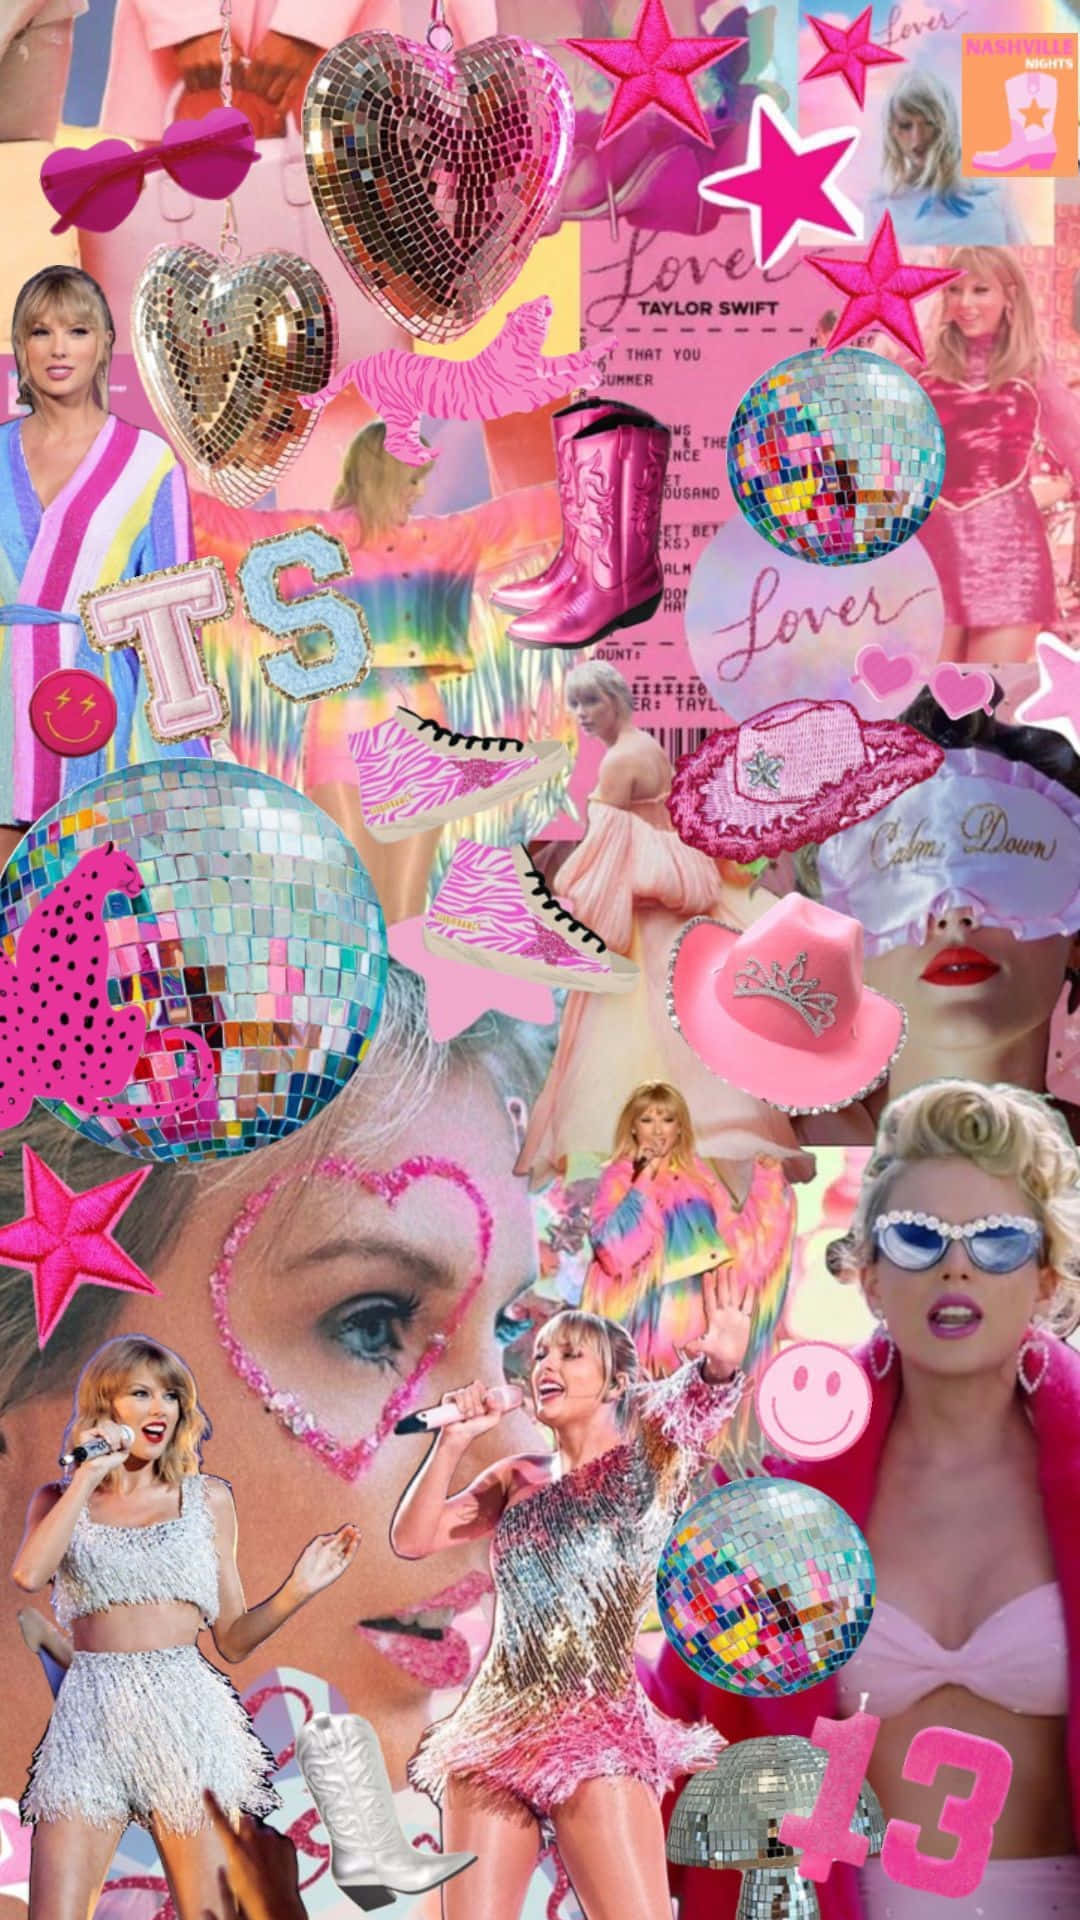 Preppy Taylor Swift Collage Wallpaper